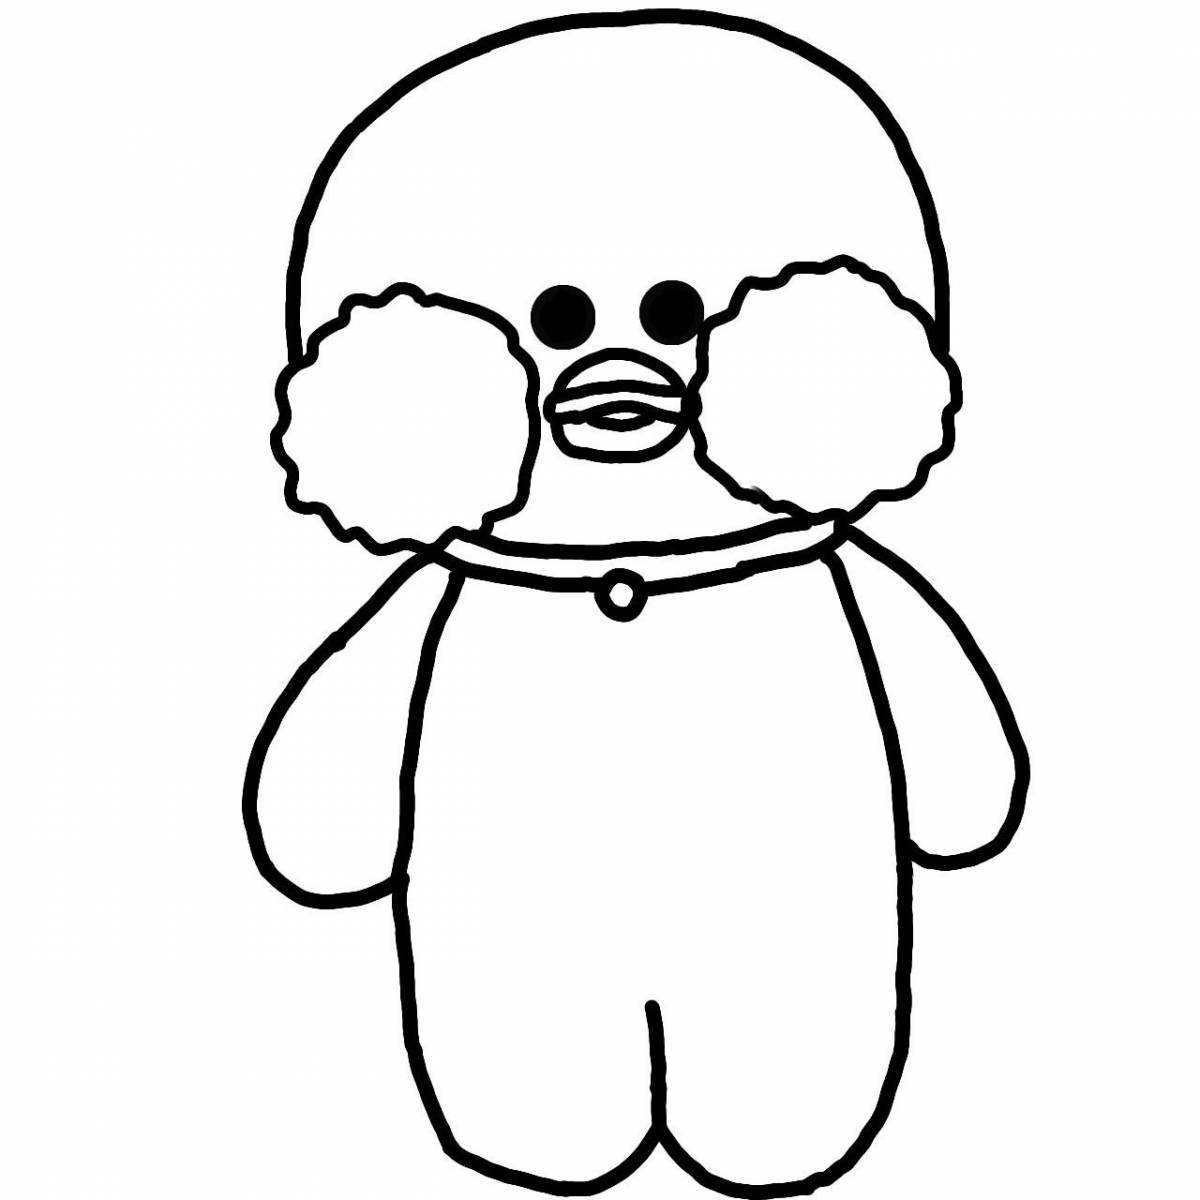 Coloring page gorgeous lalafanfan duck